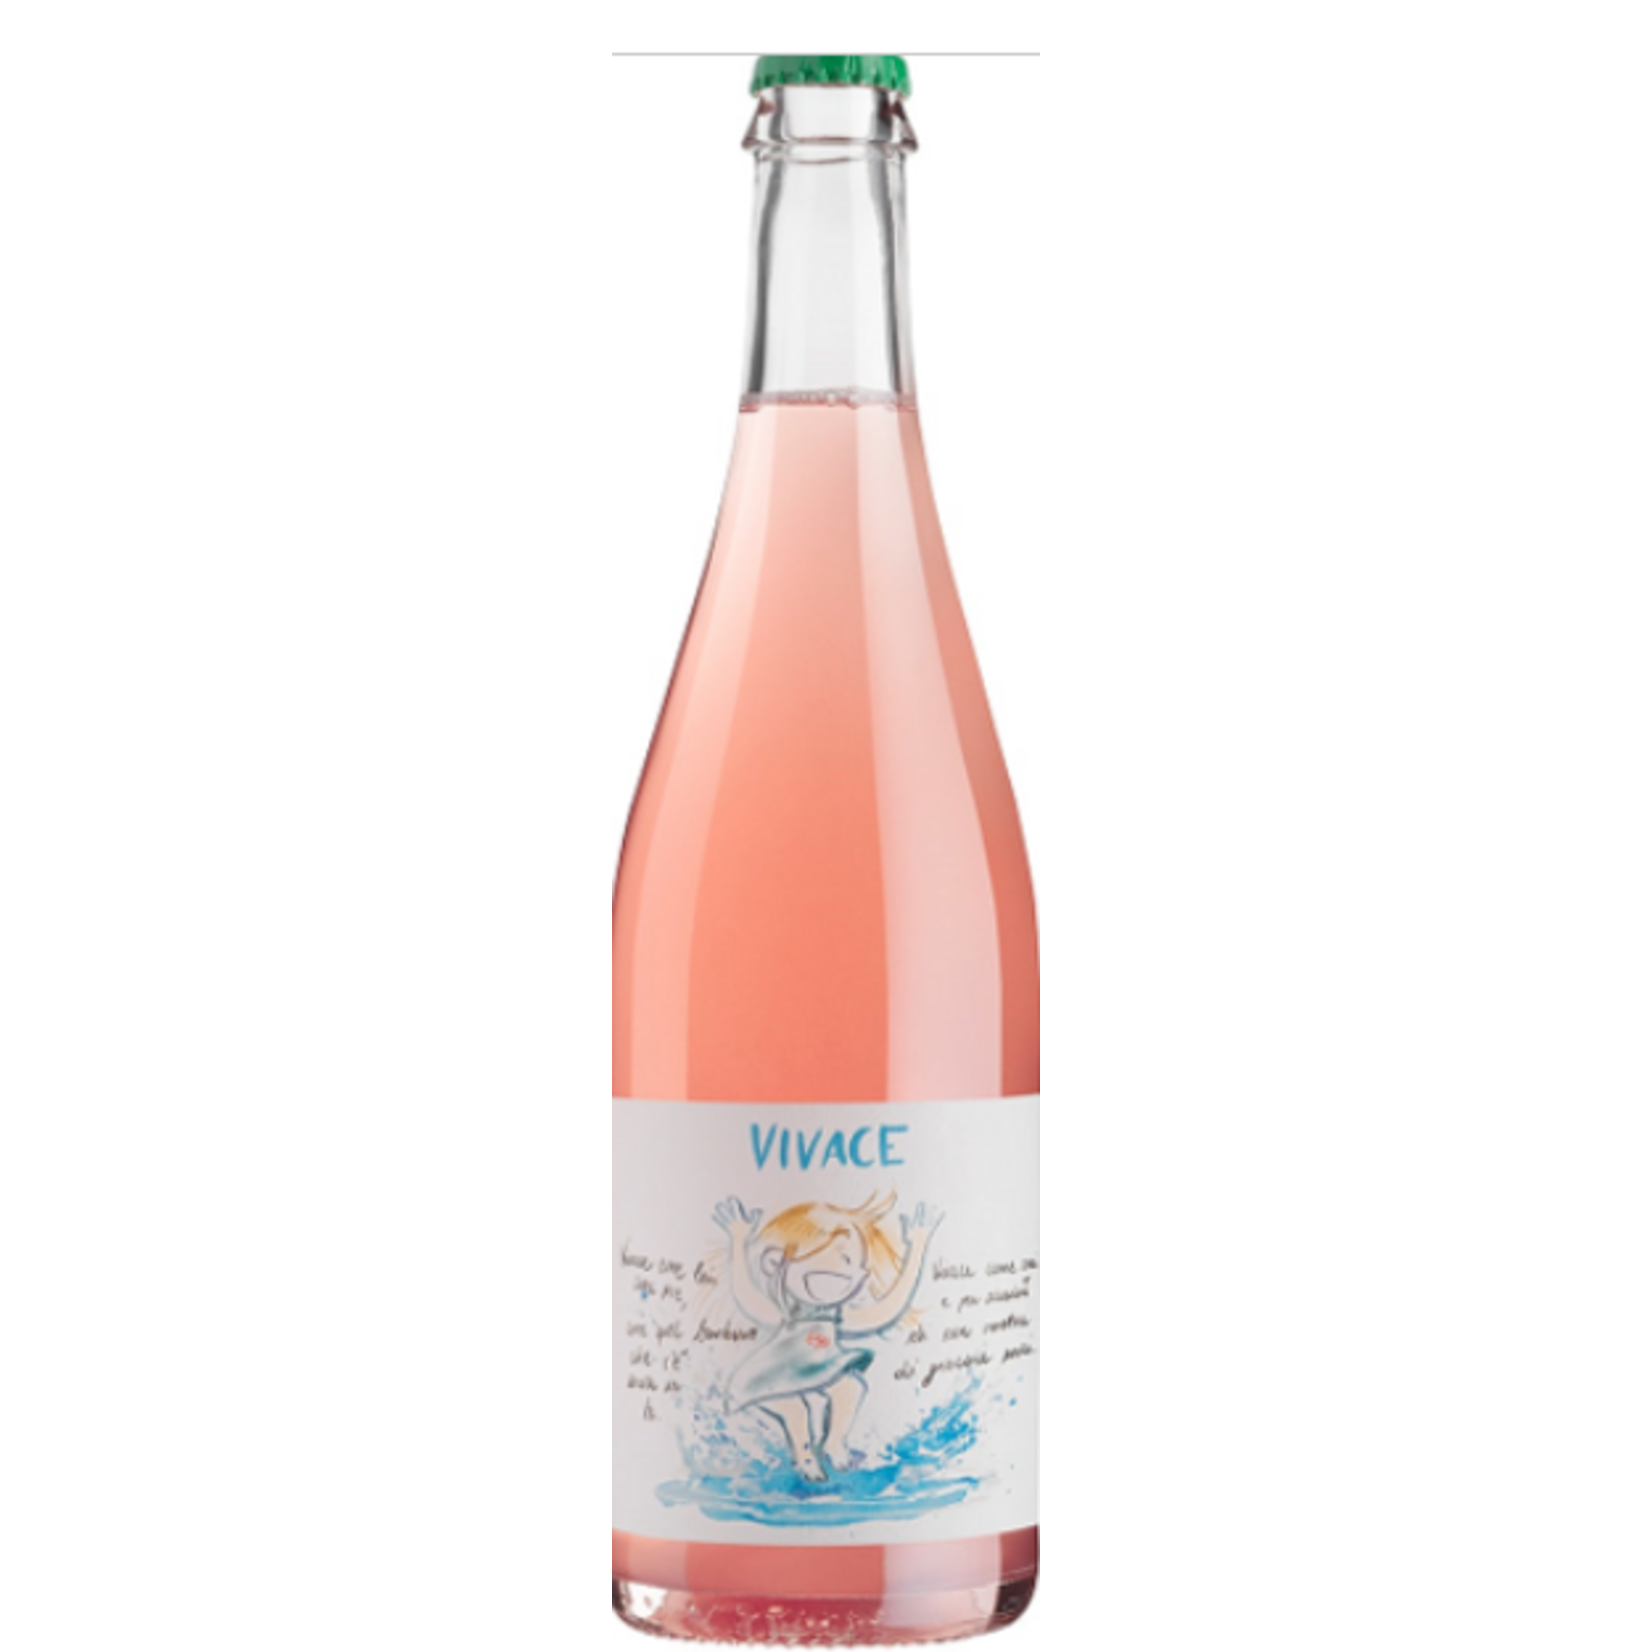 Vivace Vivace Red Semi-Sweet Sparkling, Italy